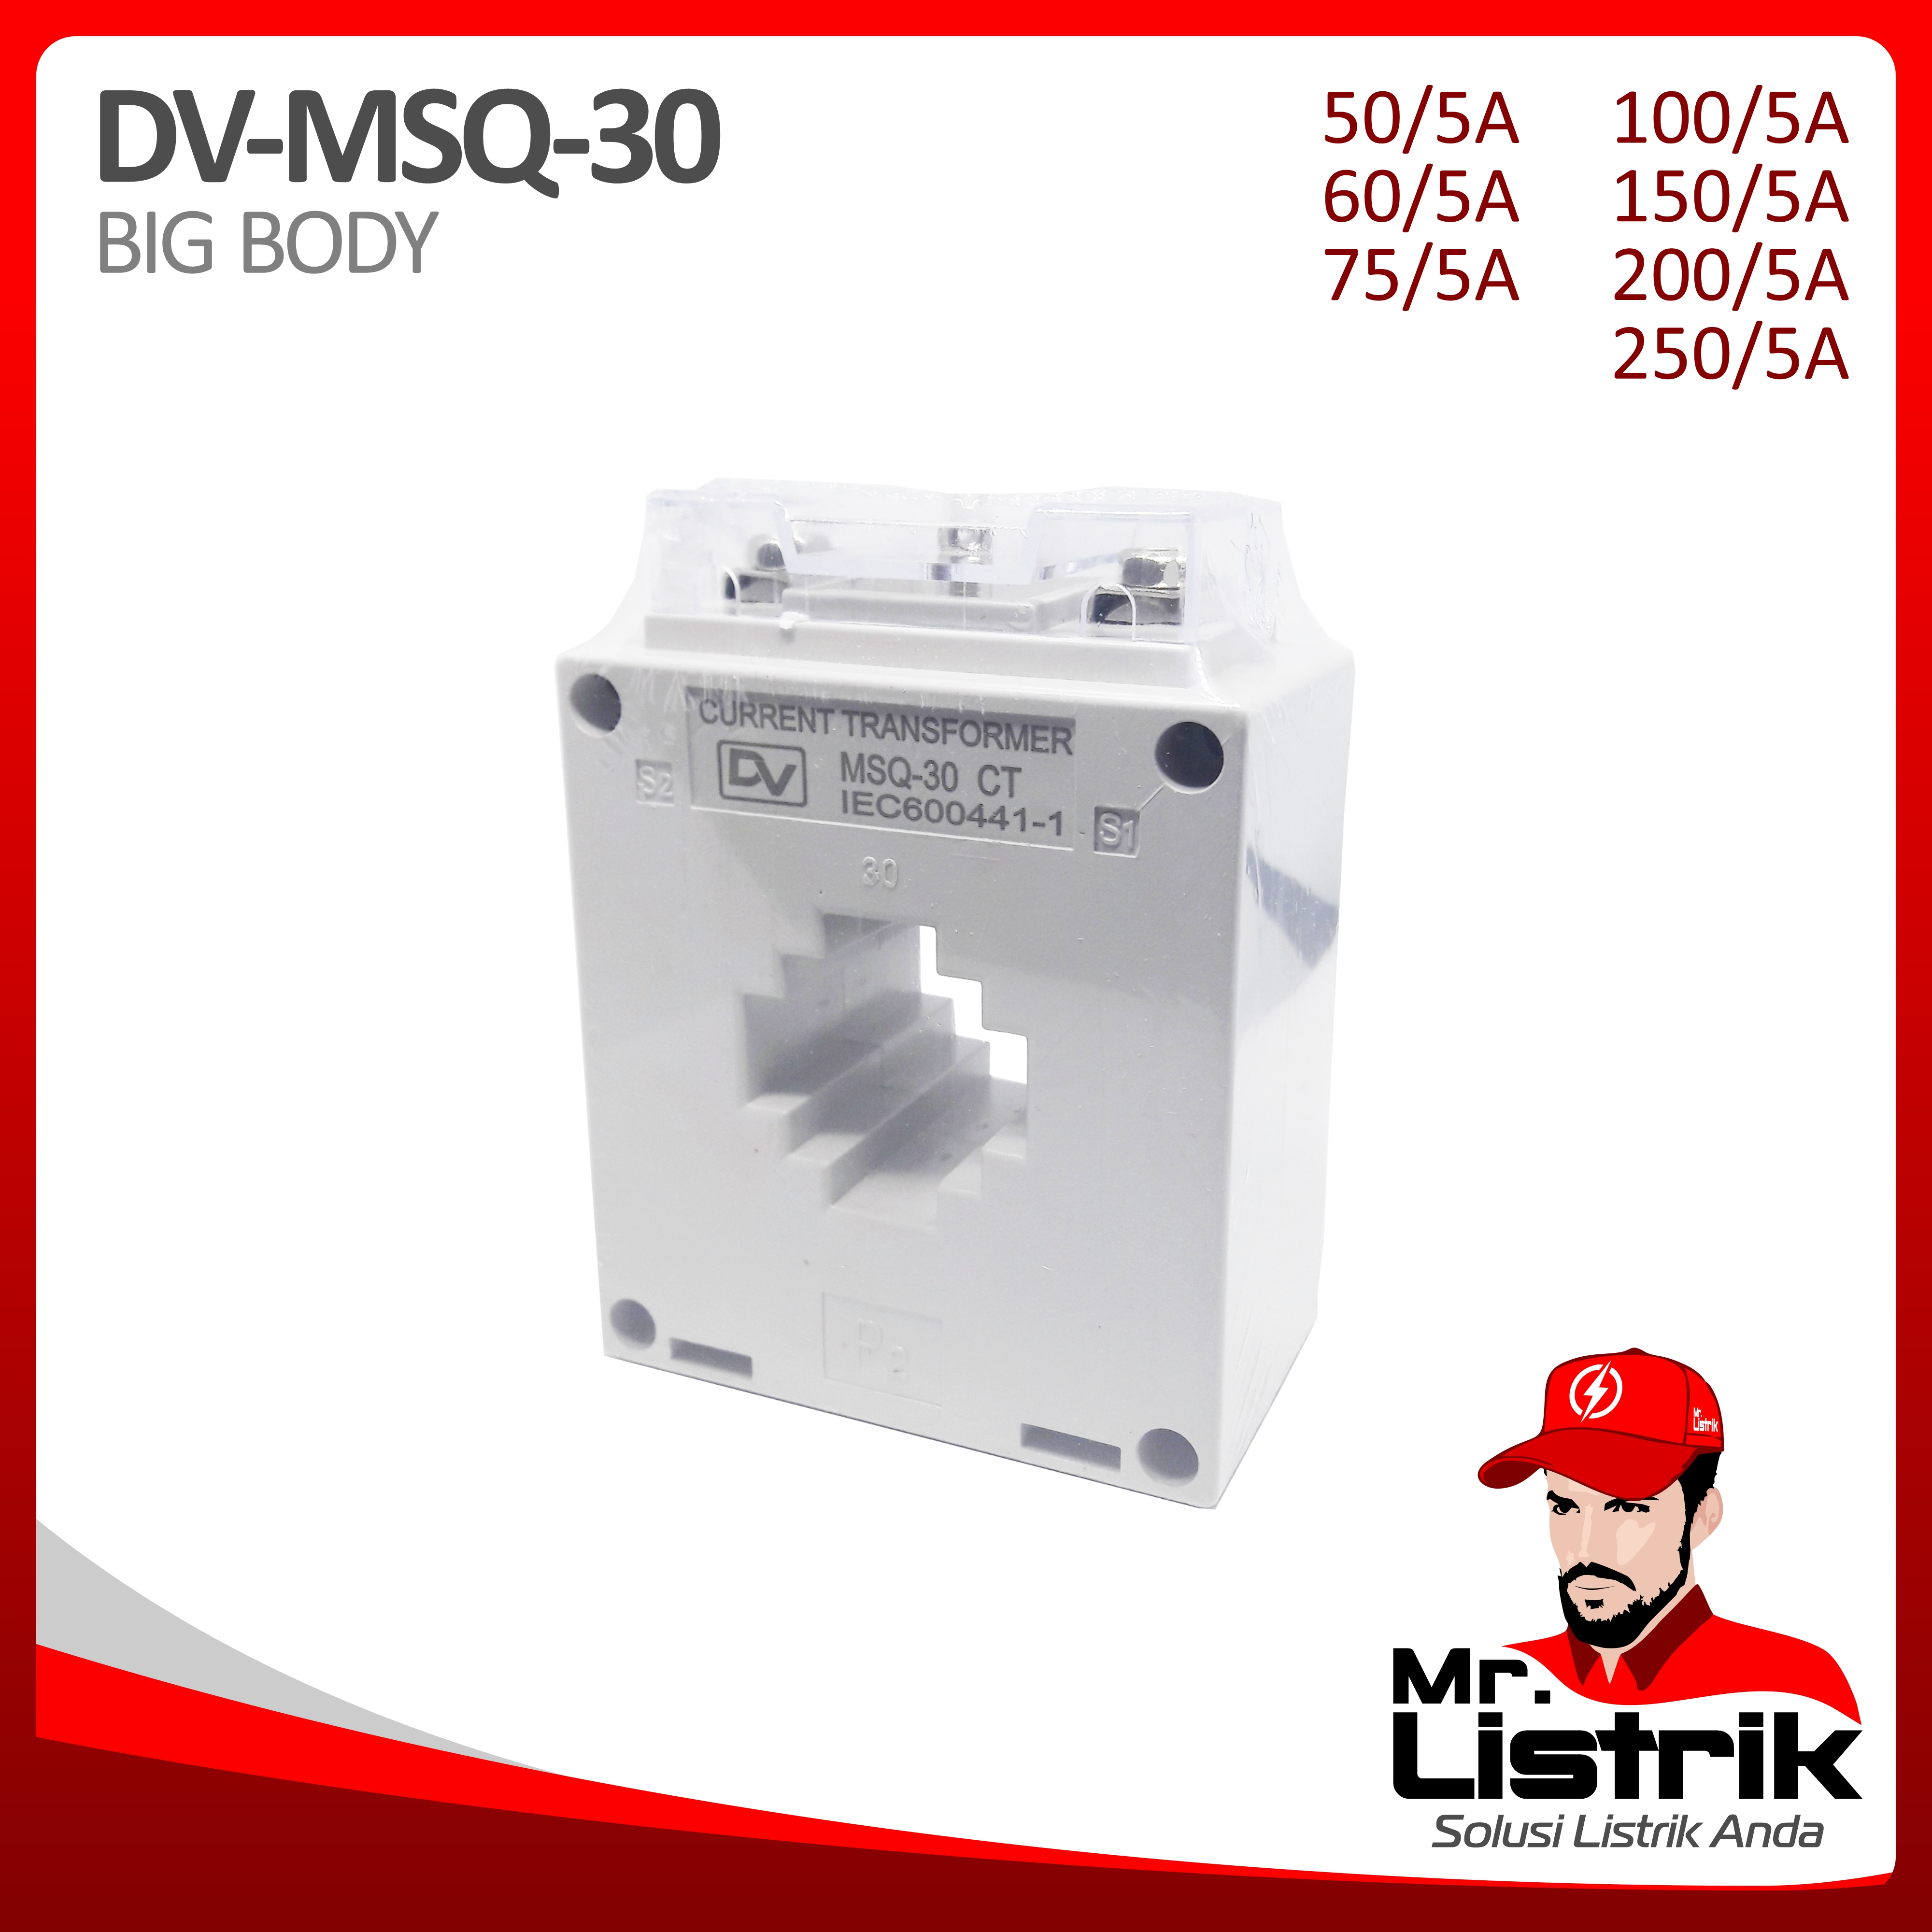 Current Transformer DV Fixed Type MSQ-30(S) Small Body 200/5A